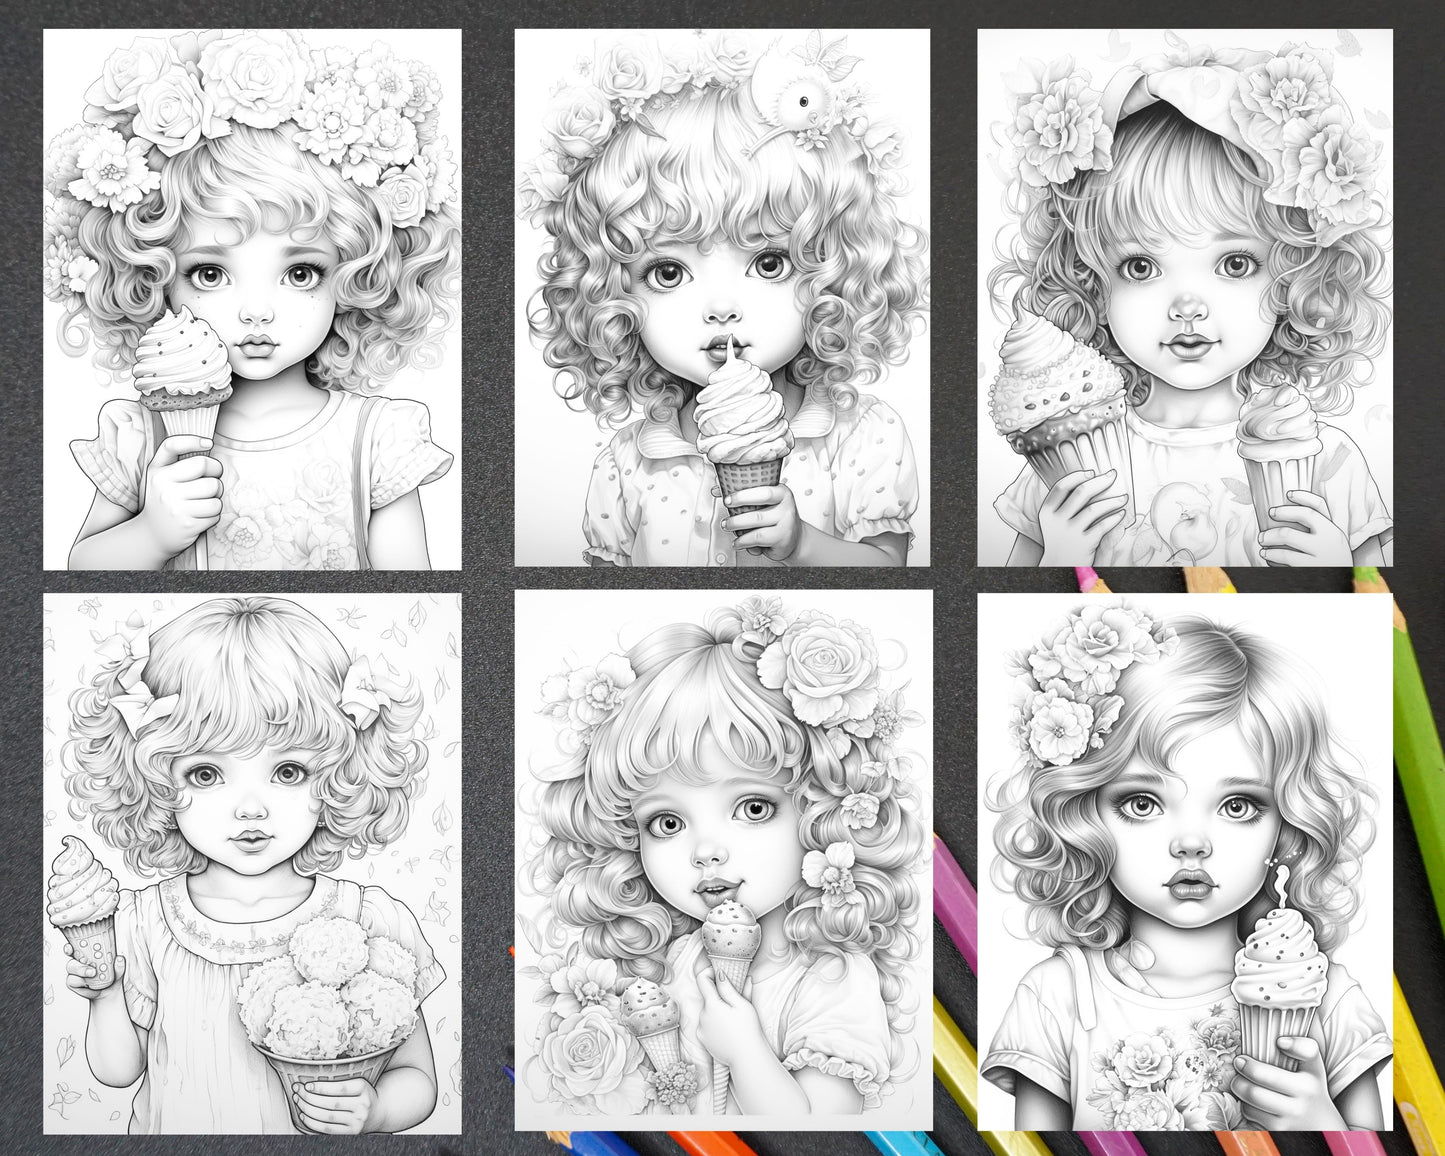 Girls with Ice Cream Coloring Pages, Printable Grayscale Coloring Pages, Adorable Coloring Pages for Adults and Kids, Ice Cream Themed Grayscale Images, Cute Girls Coloring Pages